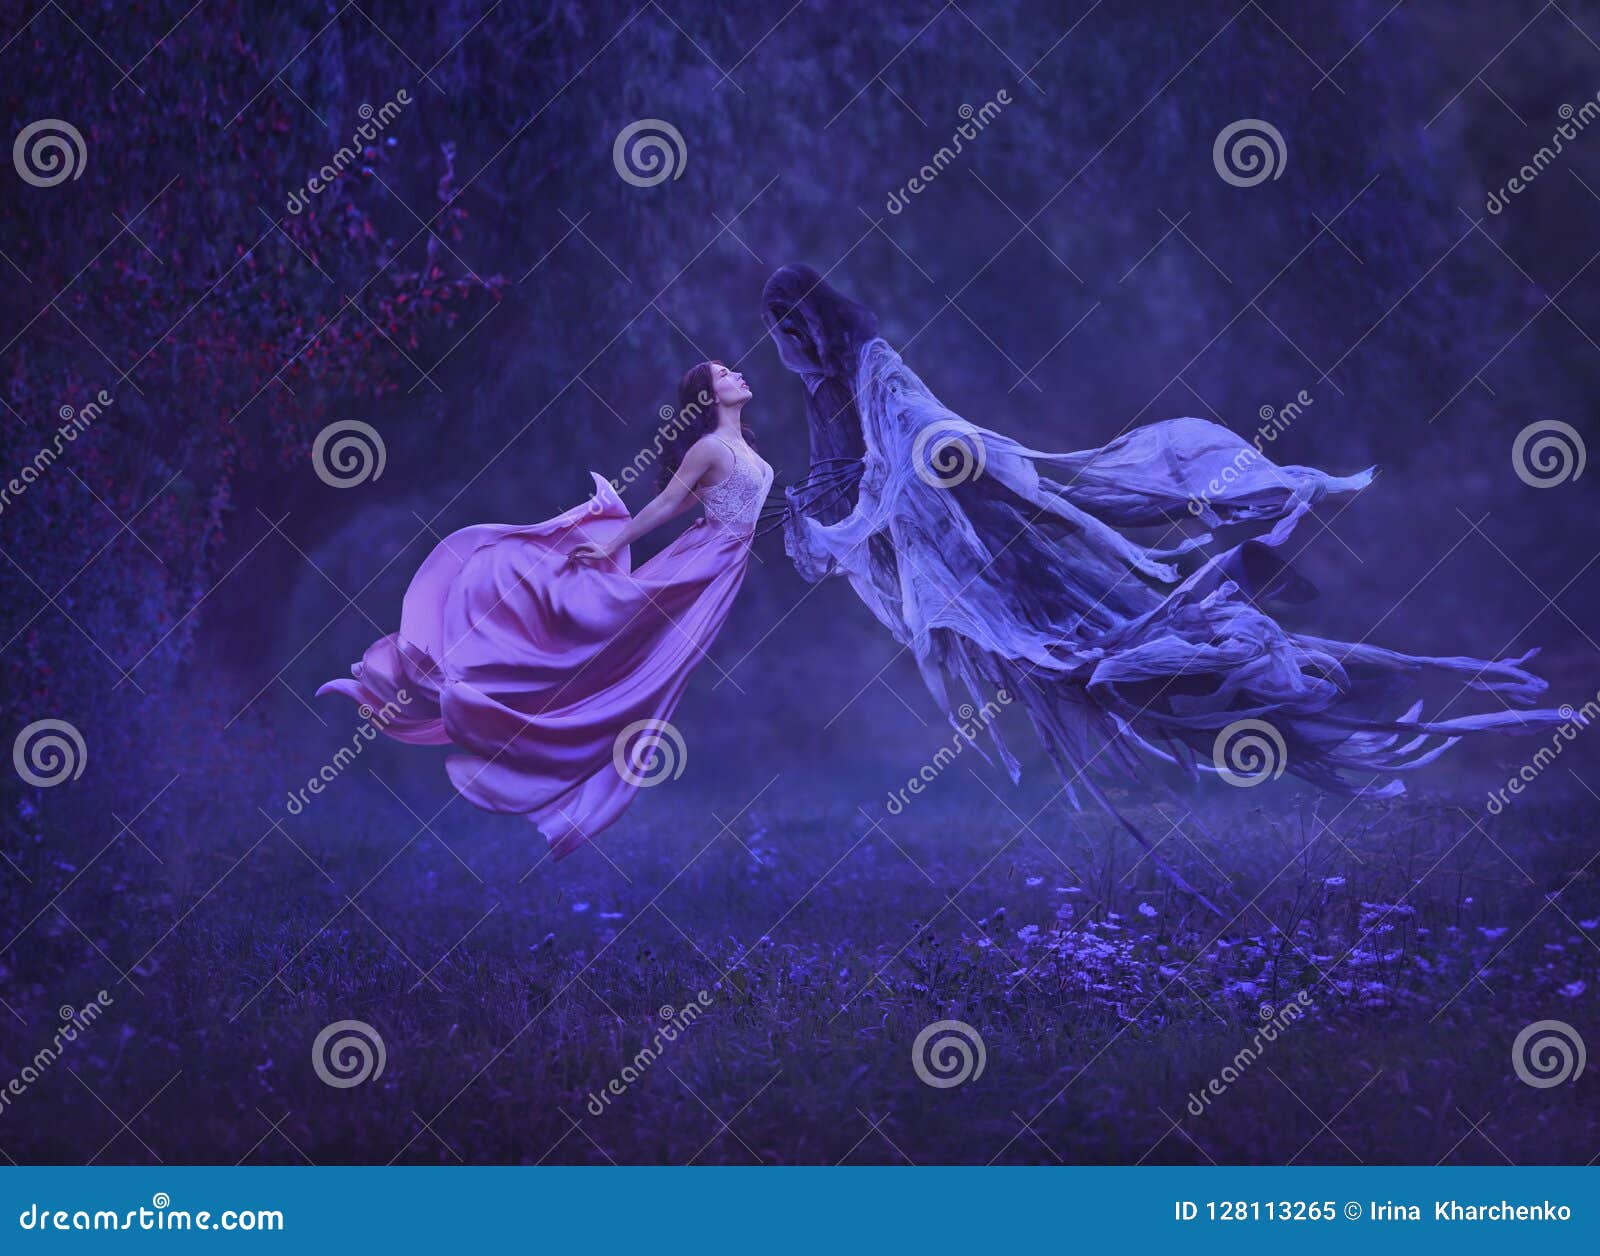 the mysterious witch is dancing with a demon, dark forces, in the air. kiss dementor. taking away the soul. a dress